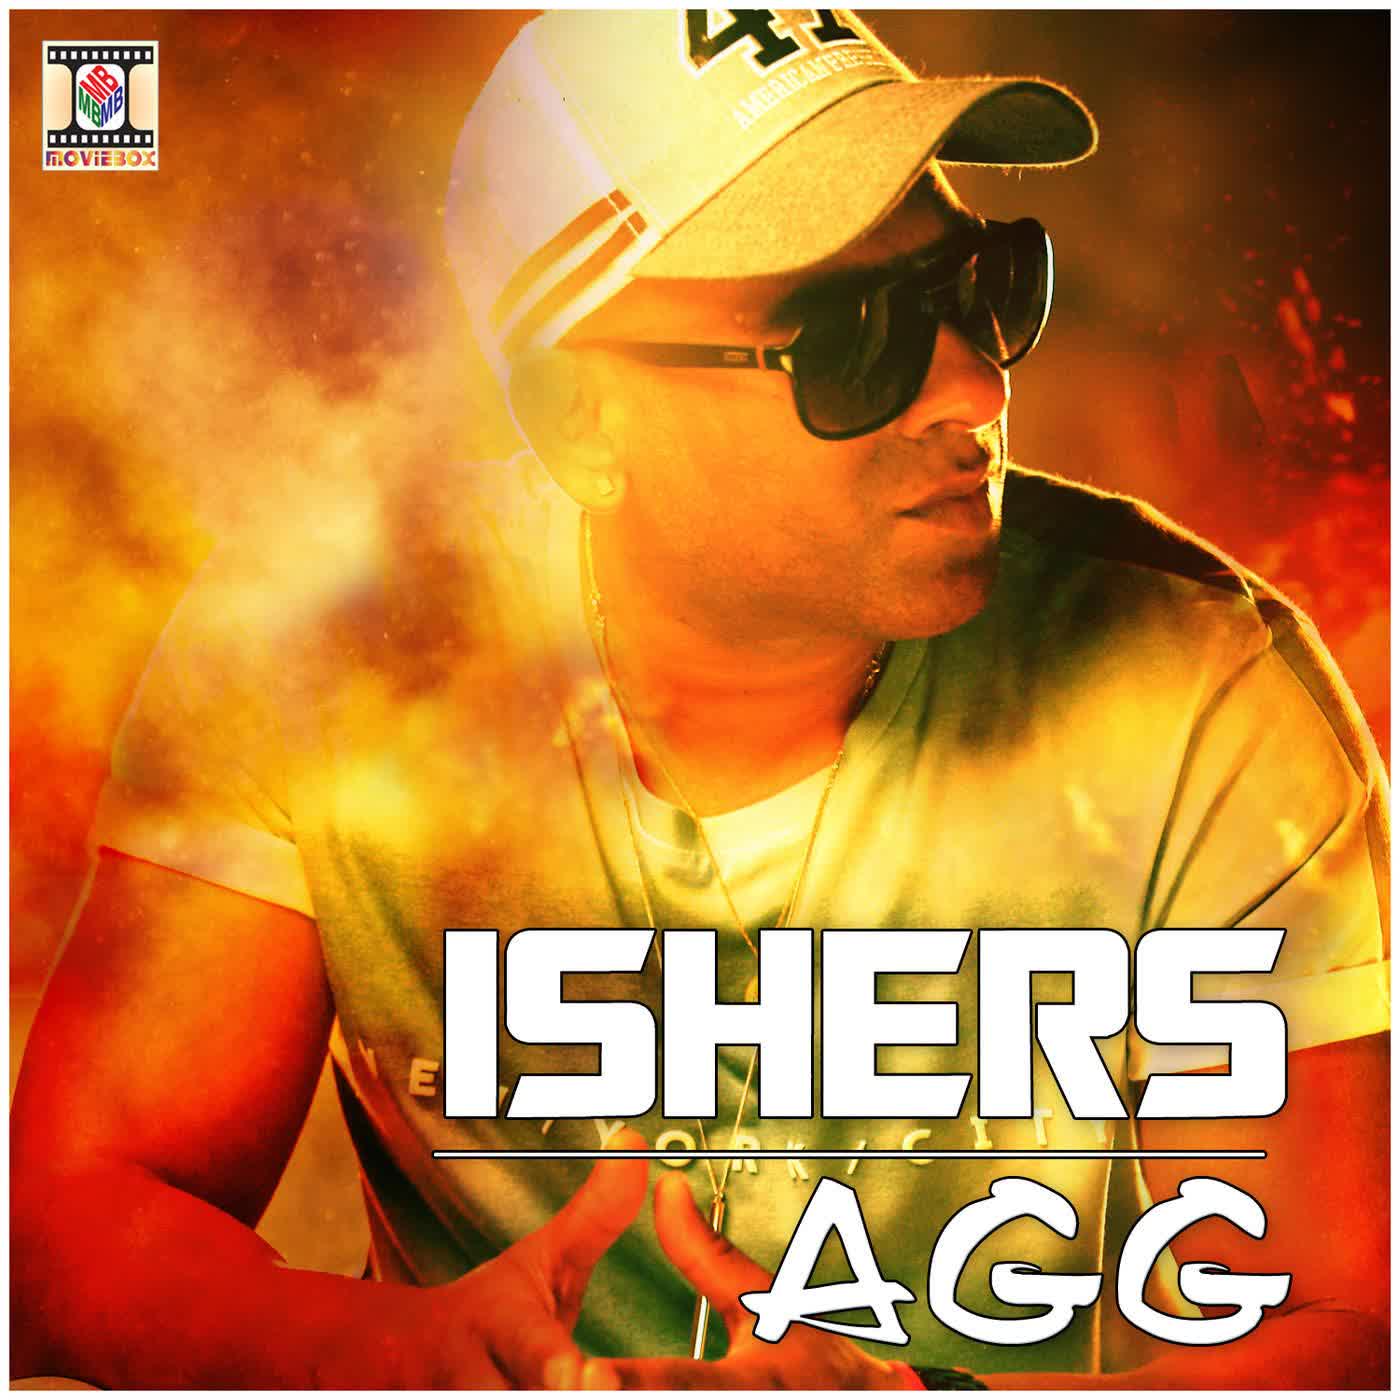 Agg Ishers  Mp3 song download